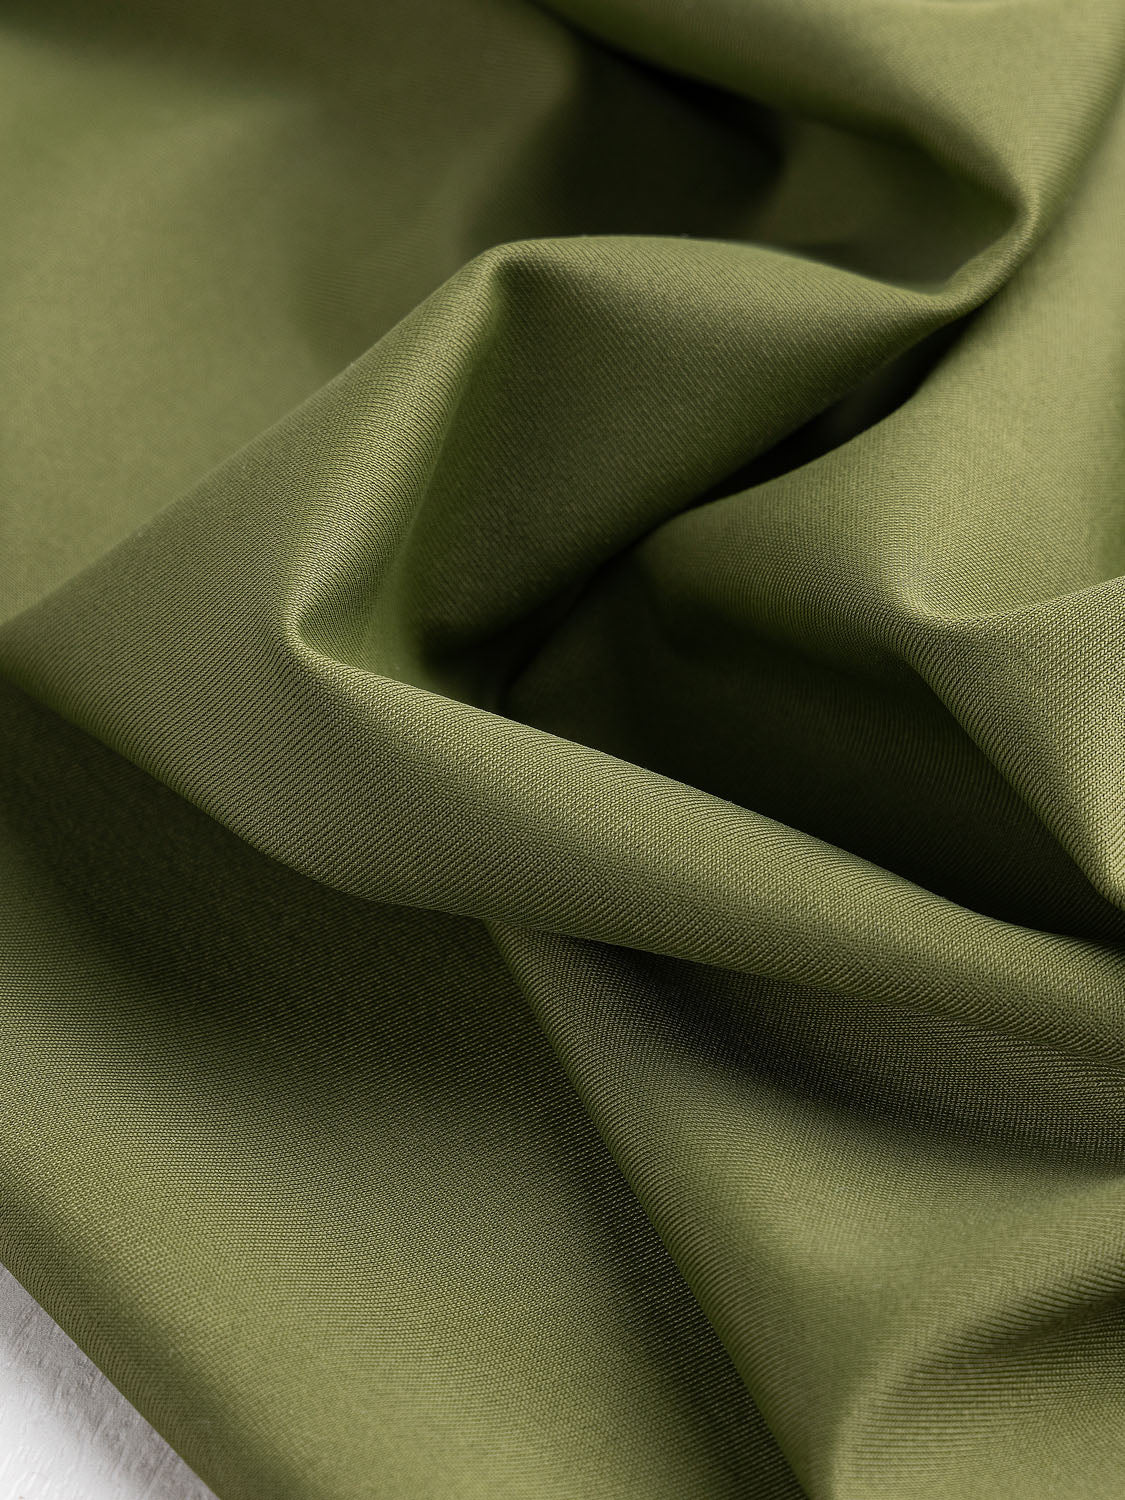 Lycra in Sea Moss Green - All About Fabrics